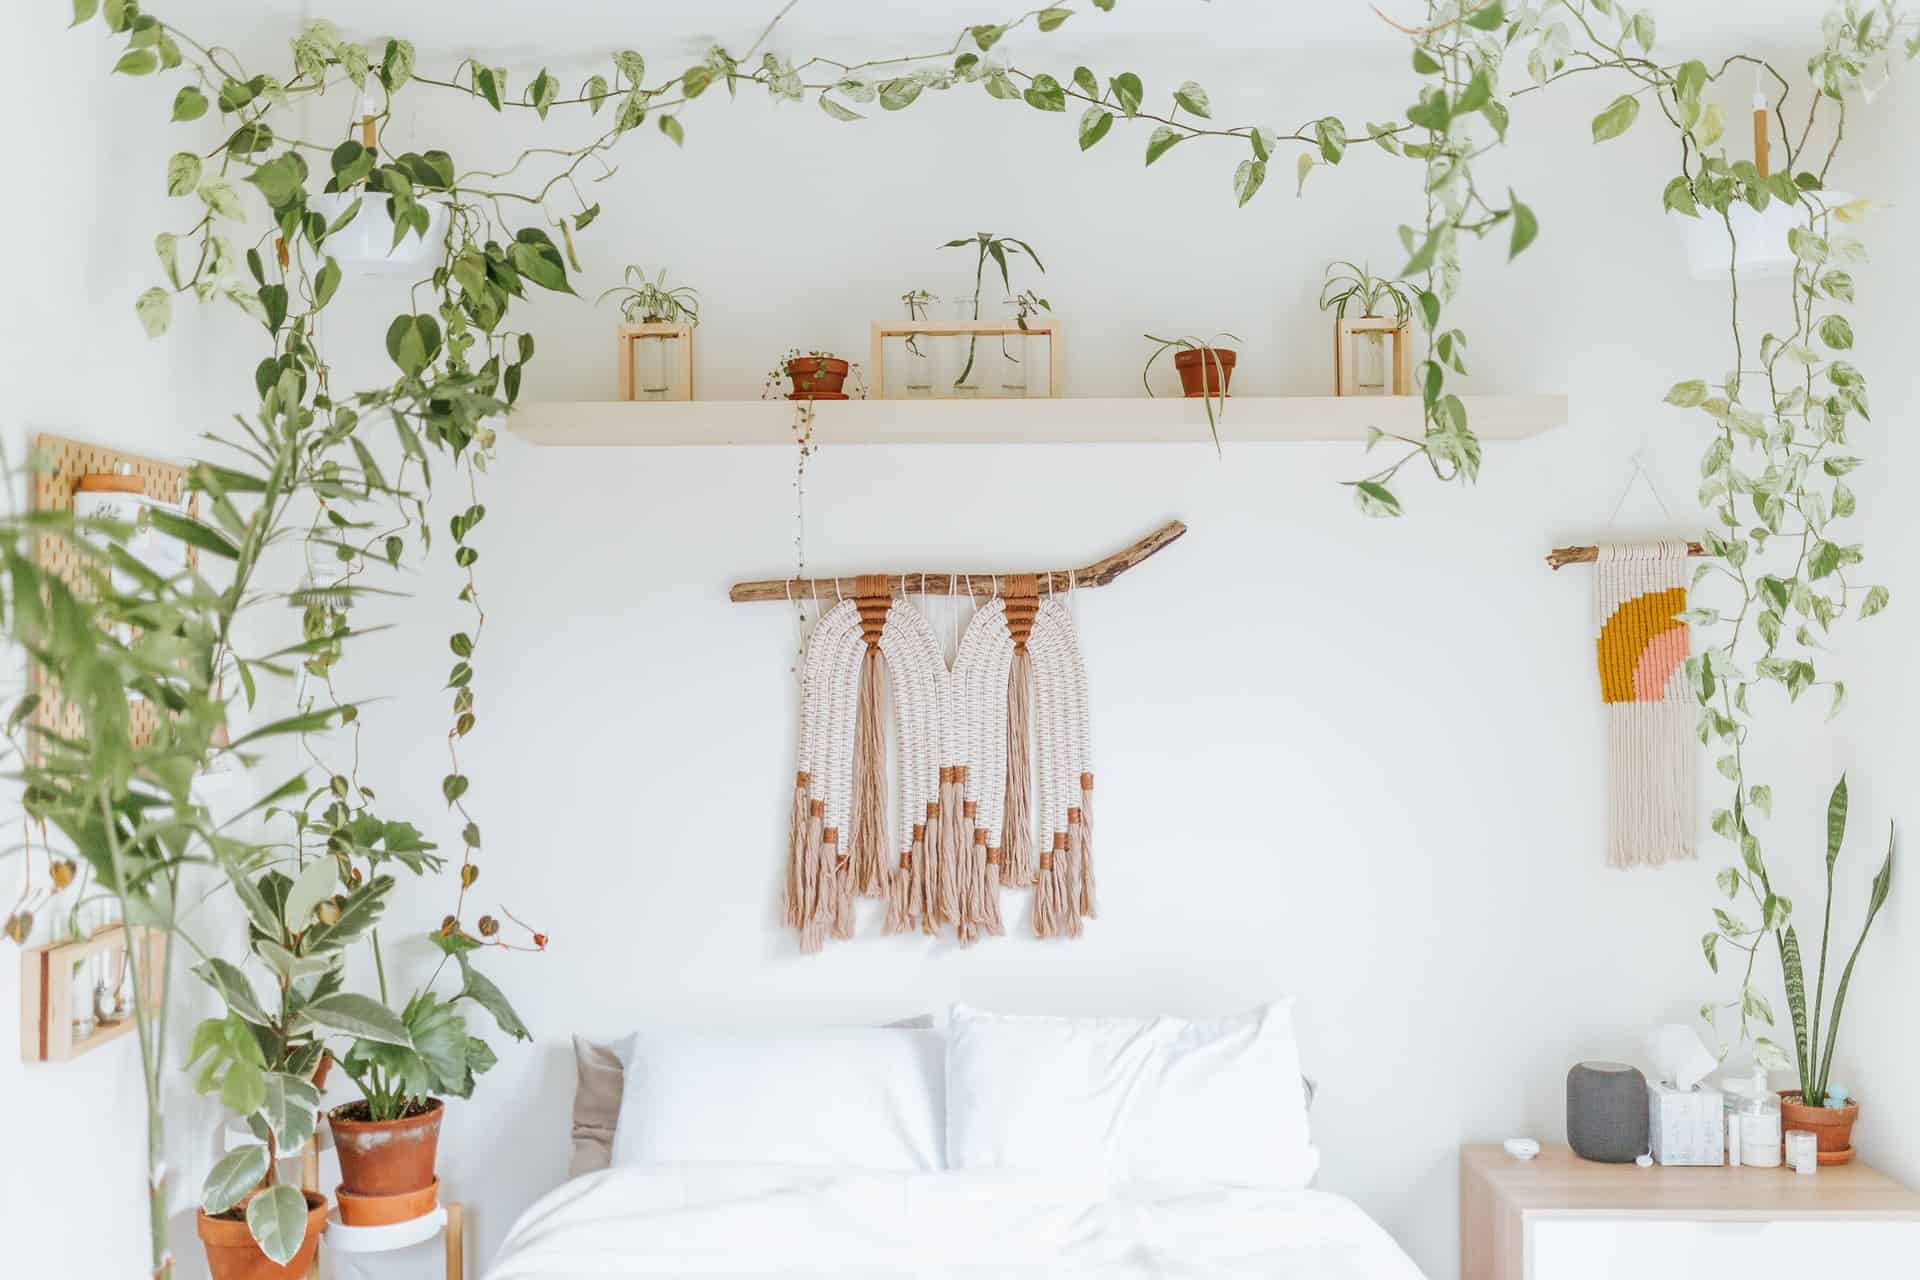 Boho style bedroom – how to decorate it?